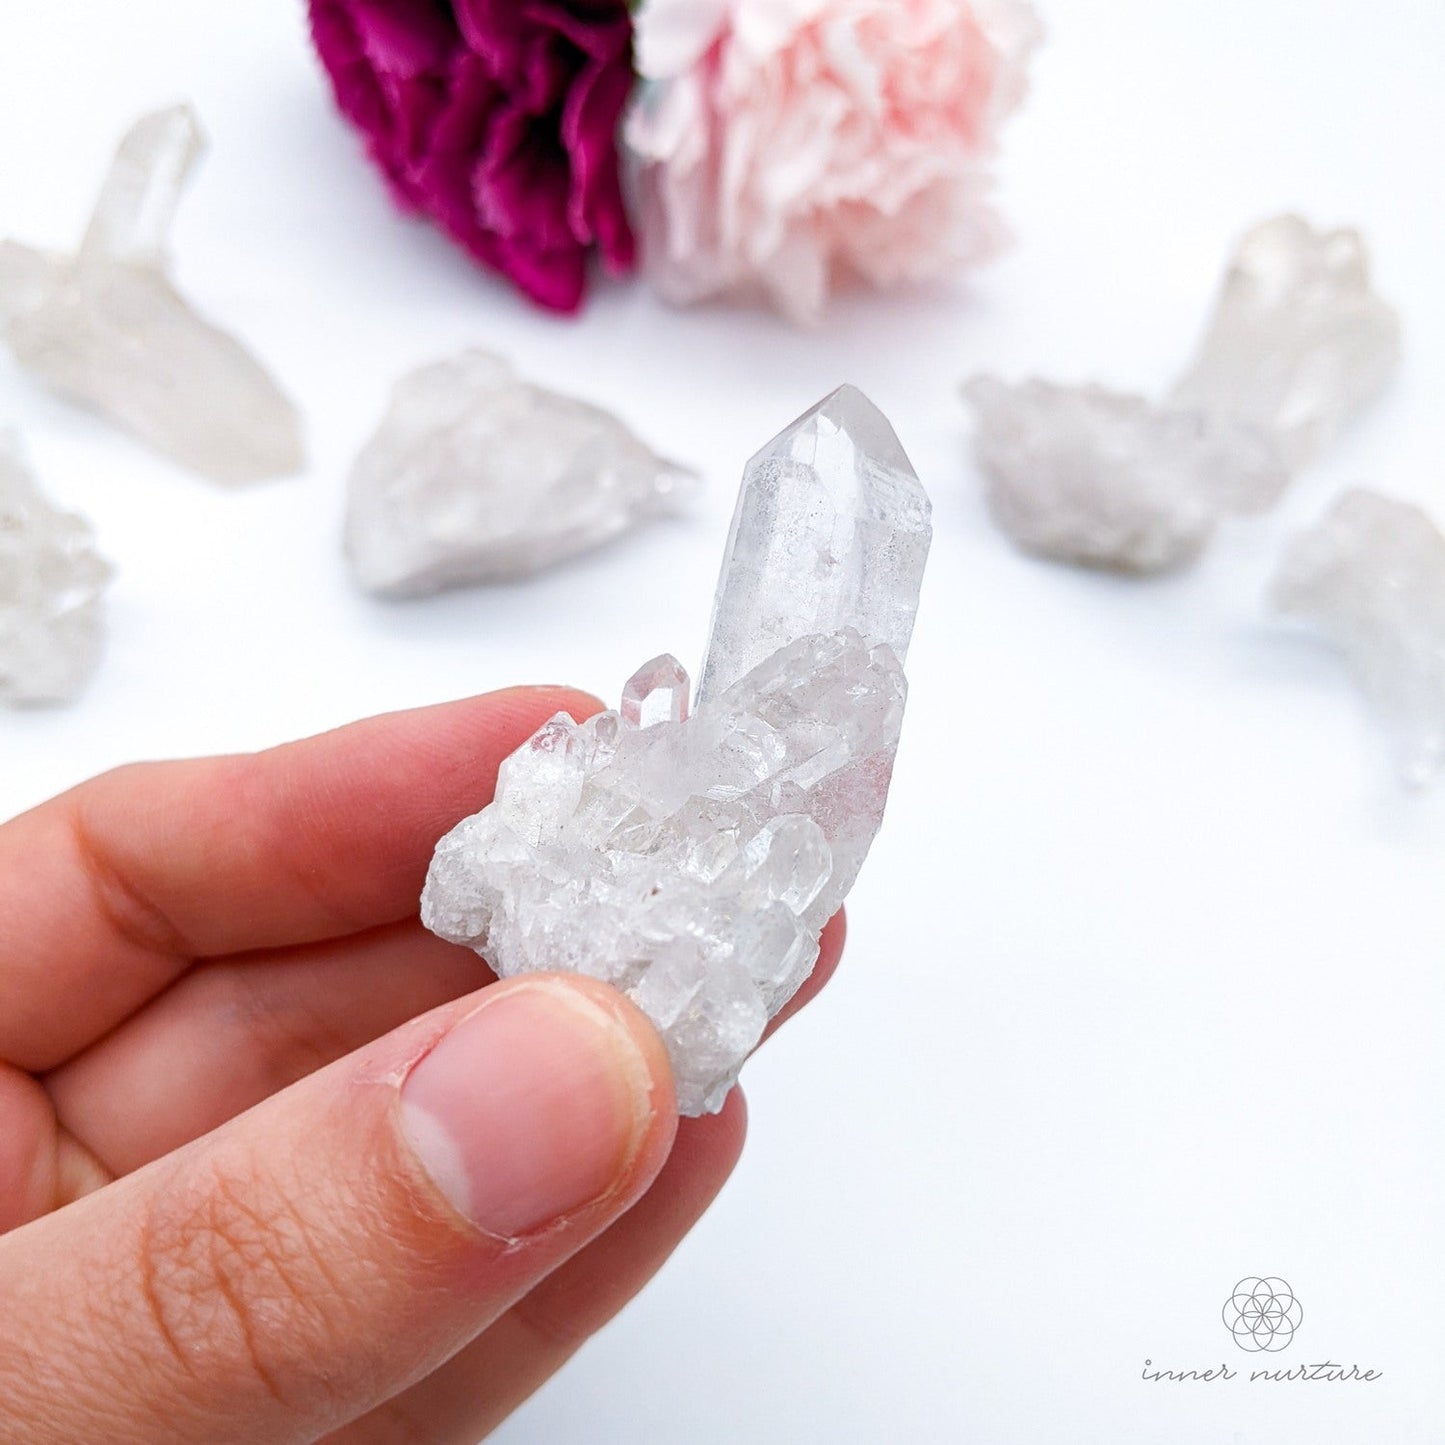 Clear Quartz Cluster - Small Sizes | Beautiful Healing Crystals Australia - Shop Online | Ethically Sourced